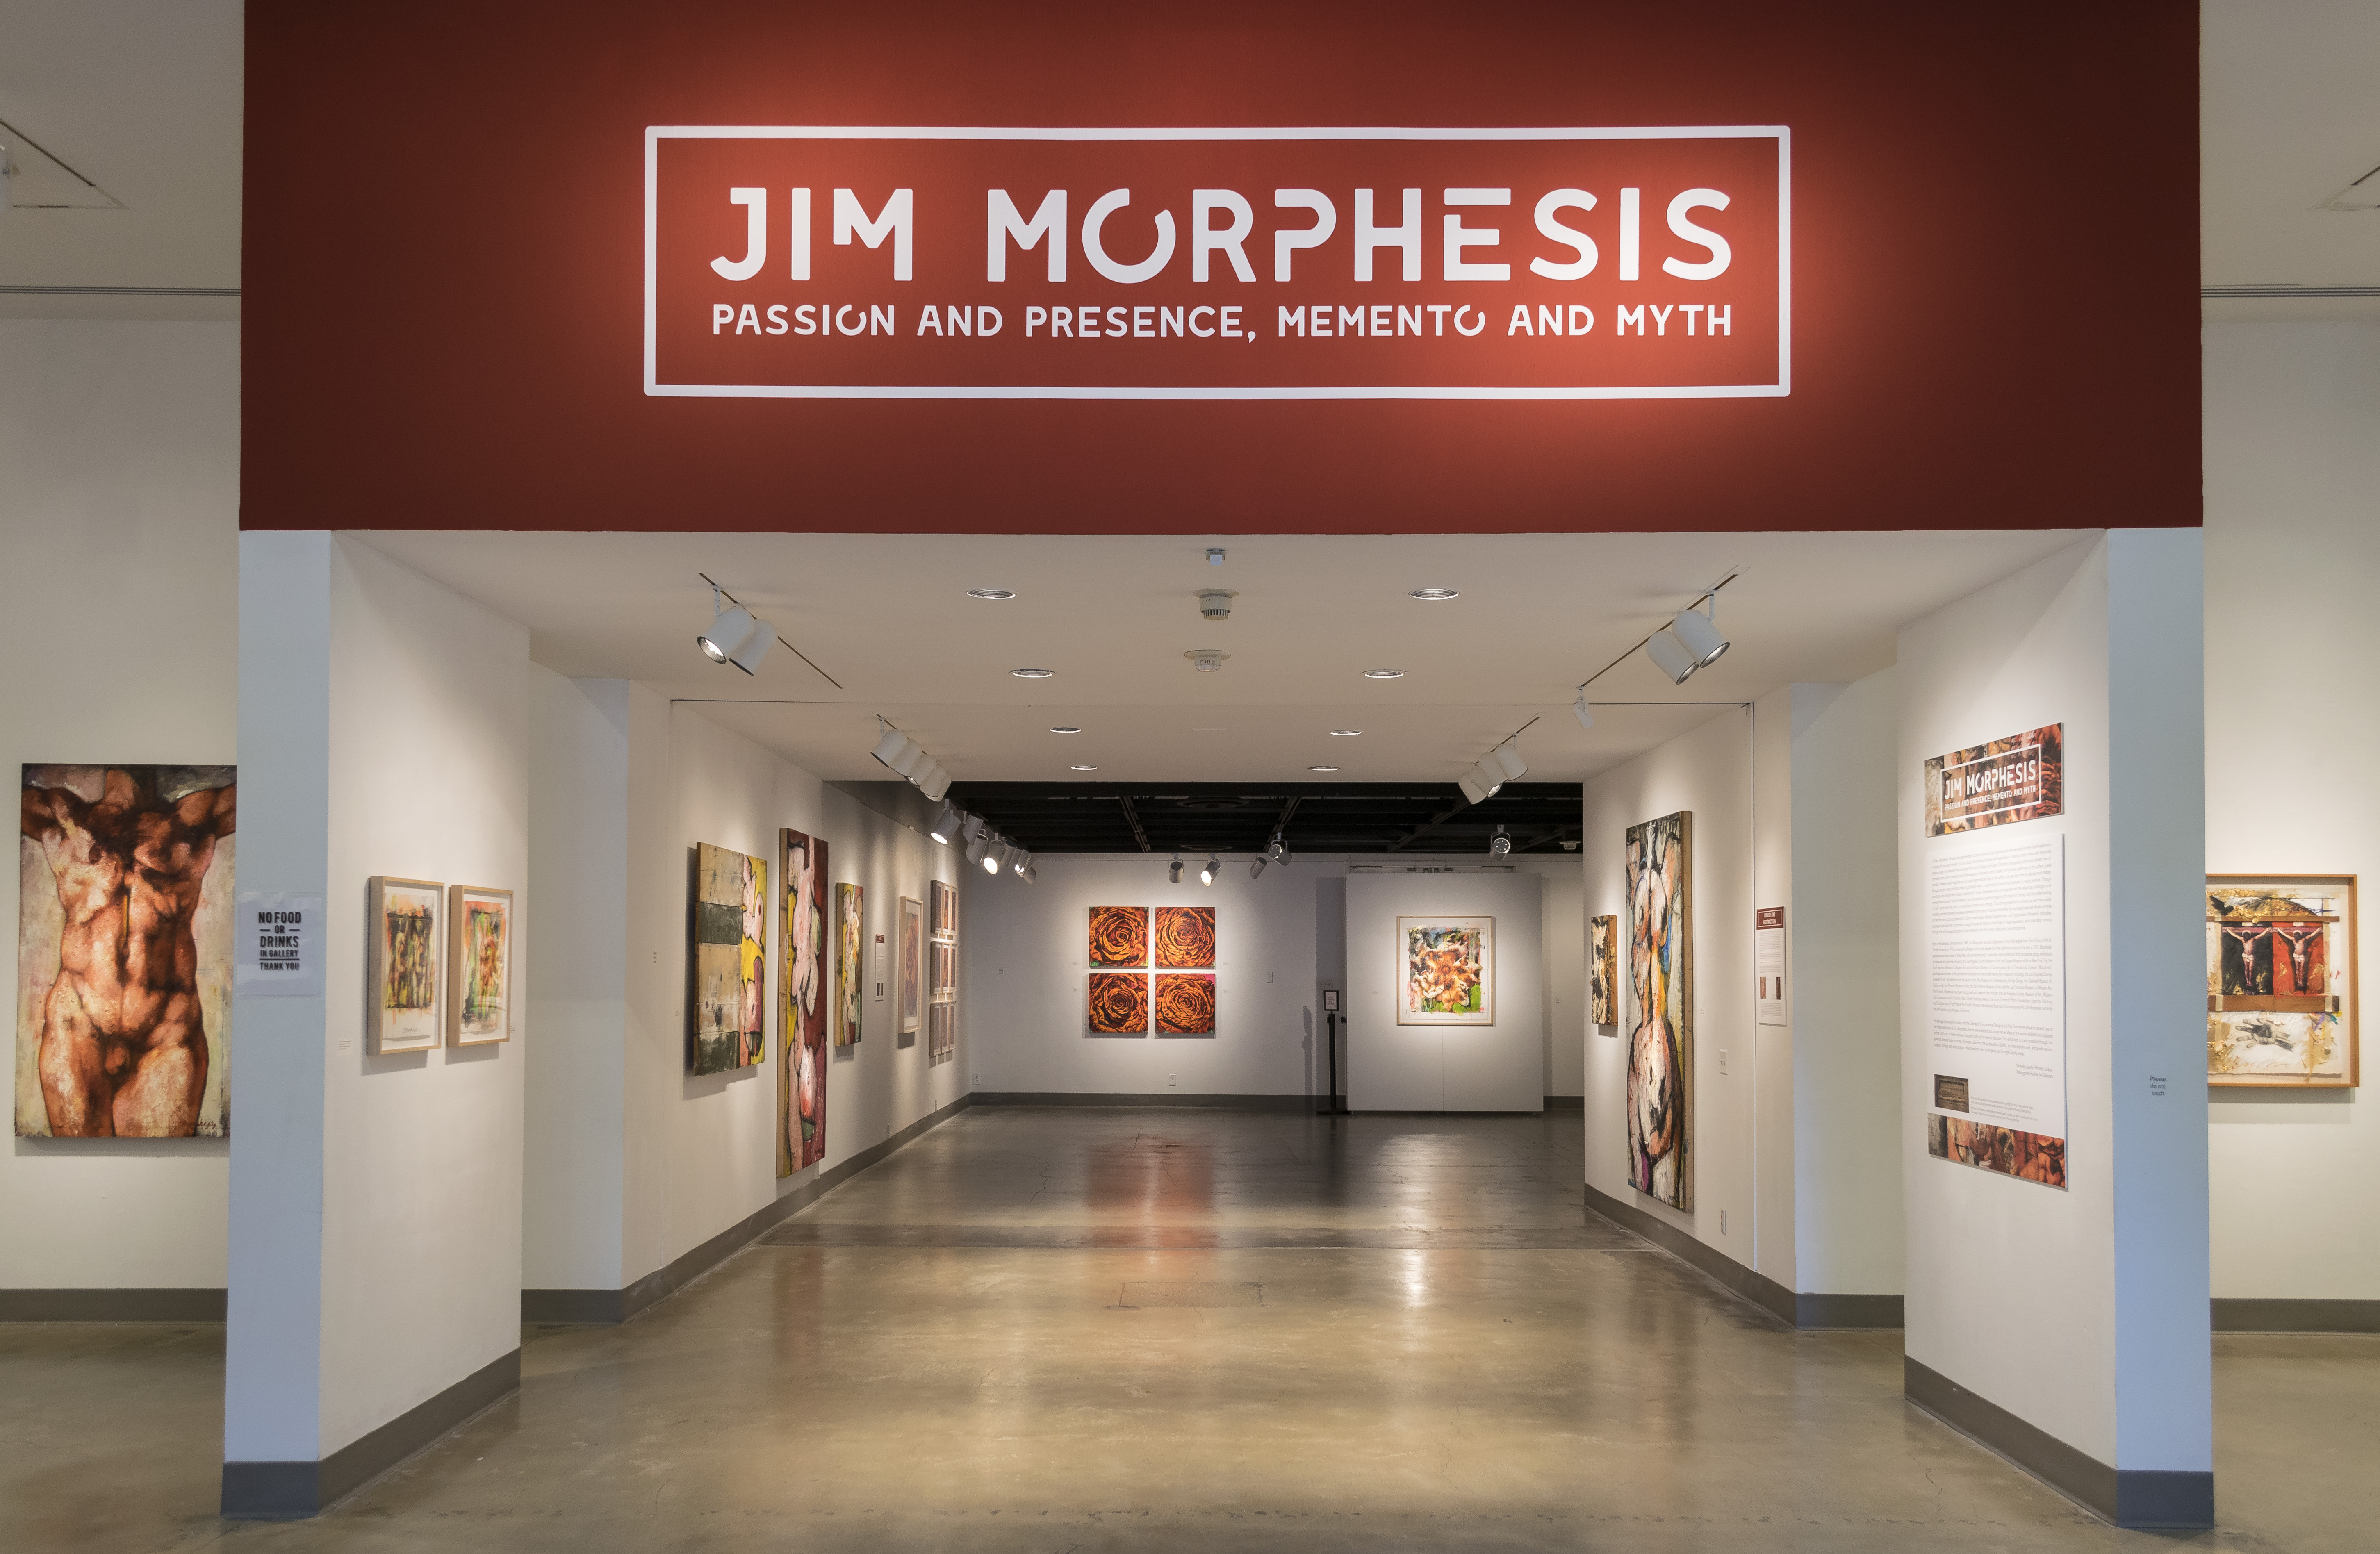 Title Wall entrance view, Exhibition: Jim Morphesis: Passion and Presence, Memento and Myth, Nov 18, 2017 - Feb 1, 2018, Curator: Michele Cairella Fillmore, W. Keith & Janet Kellogg Art Gallery, Cal Poly Pomona. [Title Wall of Jim Morphesis: Passion and Presence, Memento and Myth]